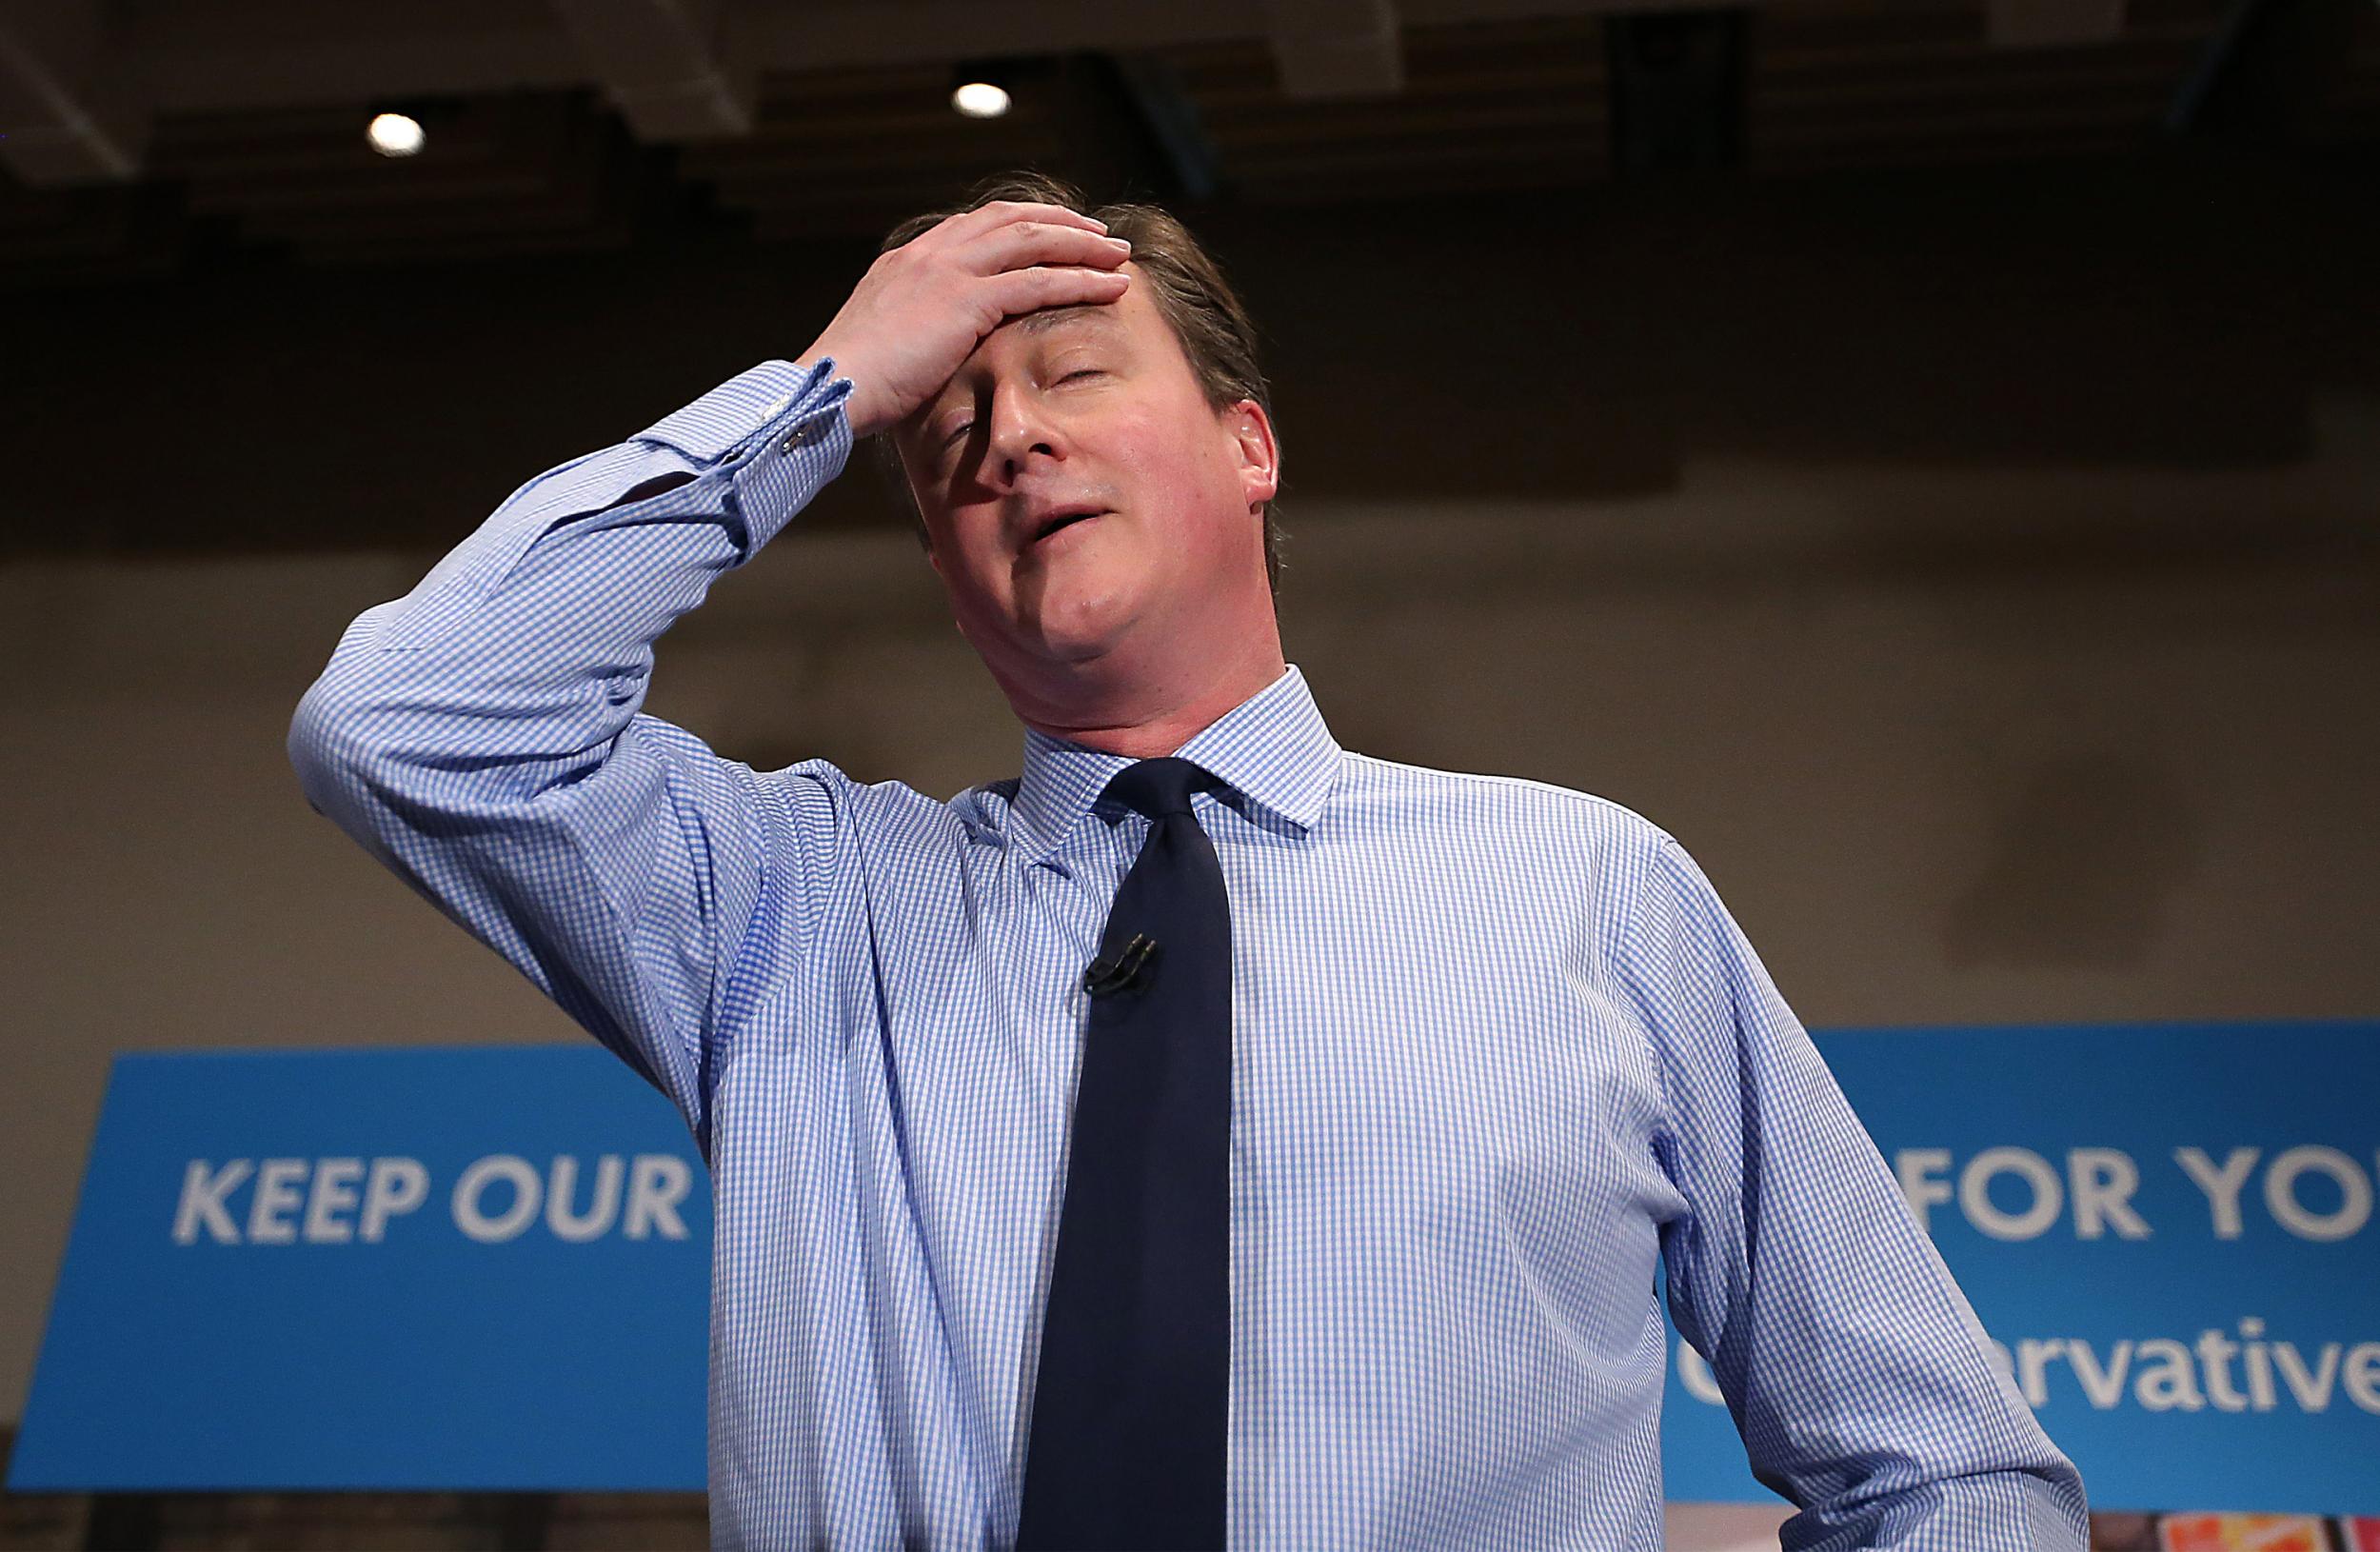 Prime Minister David Cameron wipes his brow